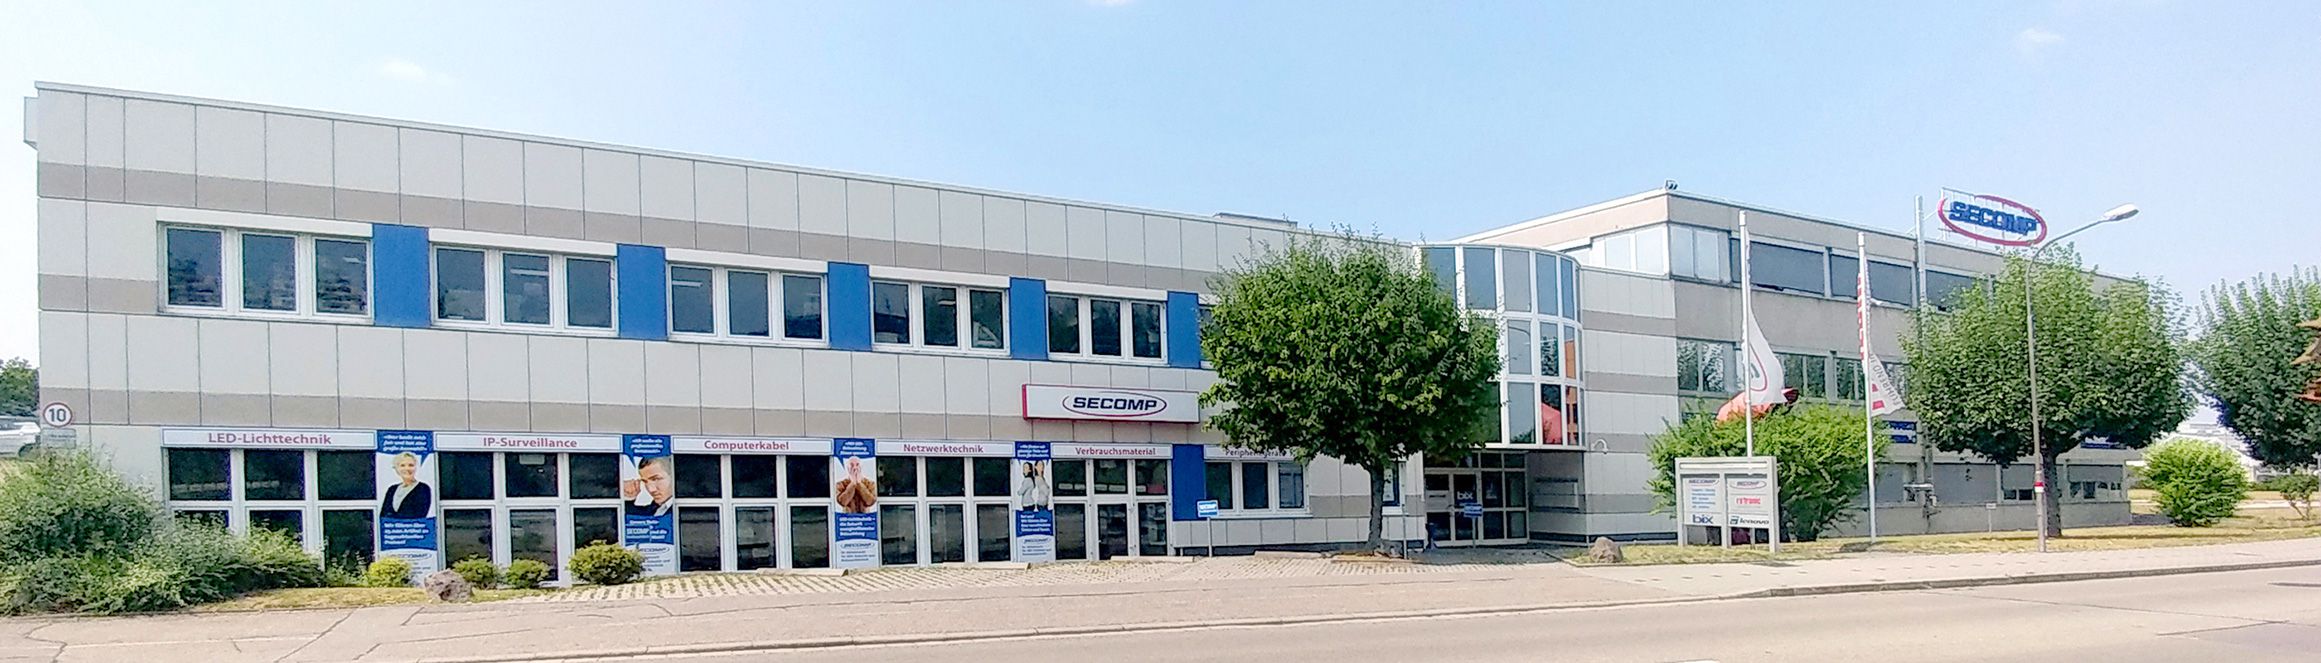 Produkte - SECOMP Electronic Components GmbH